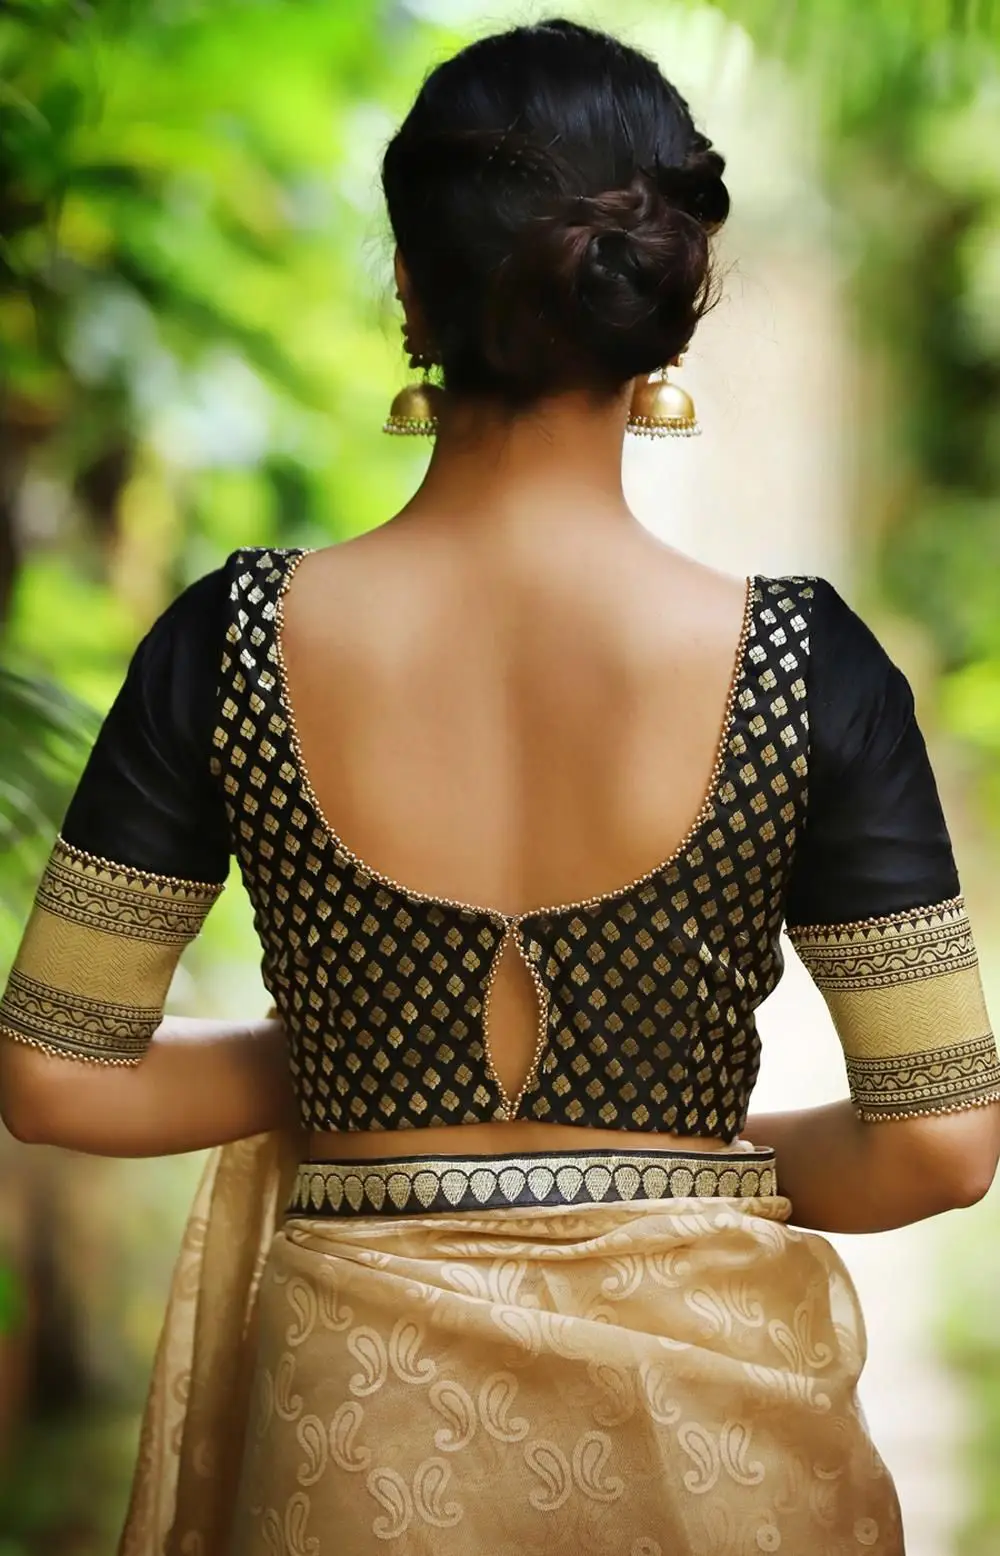 8 Readymade Brocade Blouses To Buy From Amazon